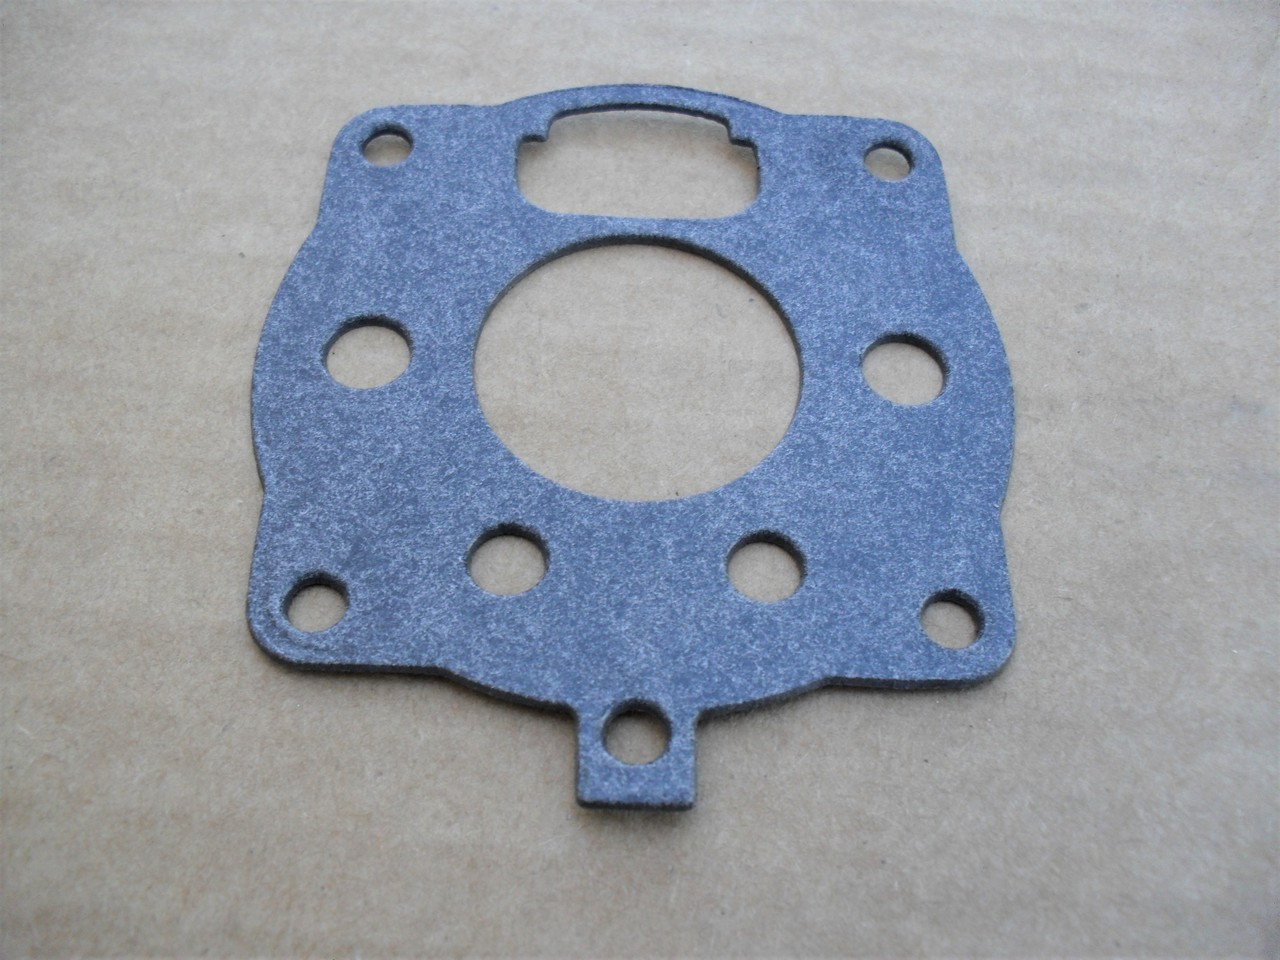 Carburetor Body Gasket for Briggs and Stratton 270268, 692215 & 243000 to 254000, 300400 Models